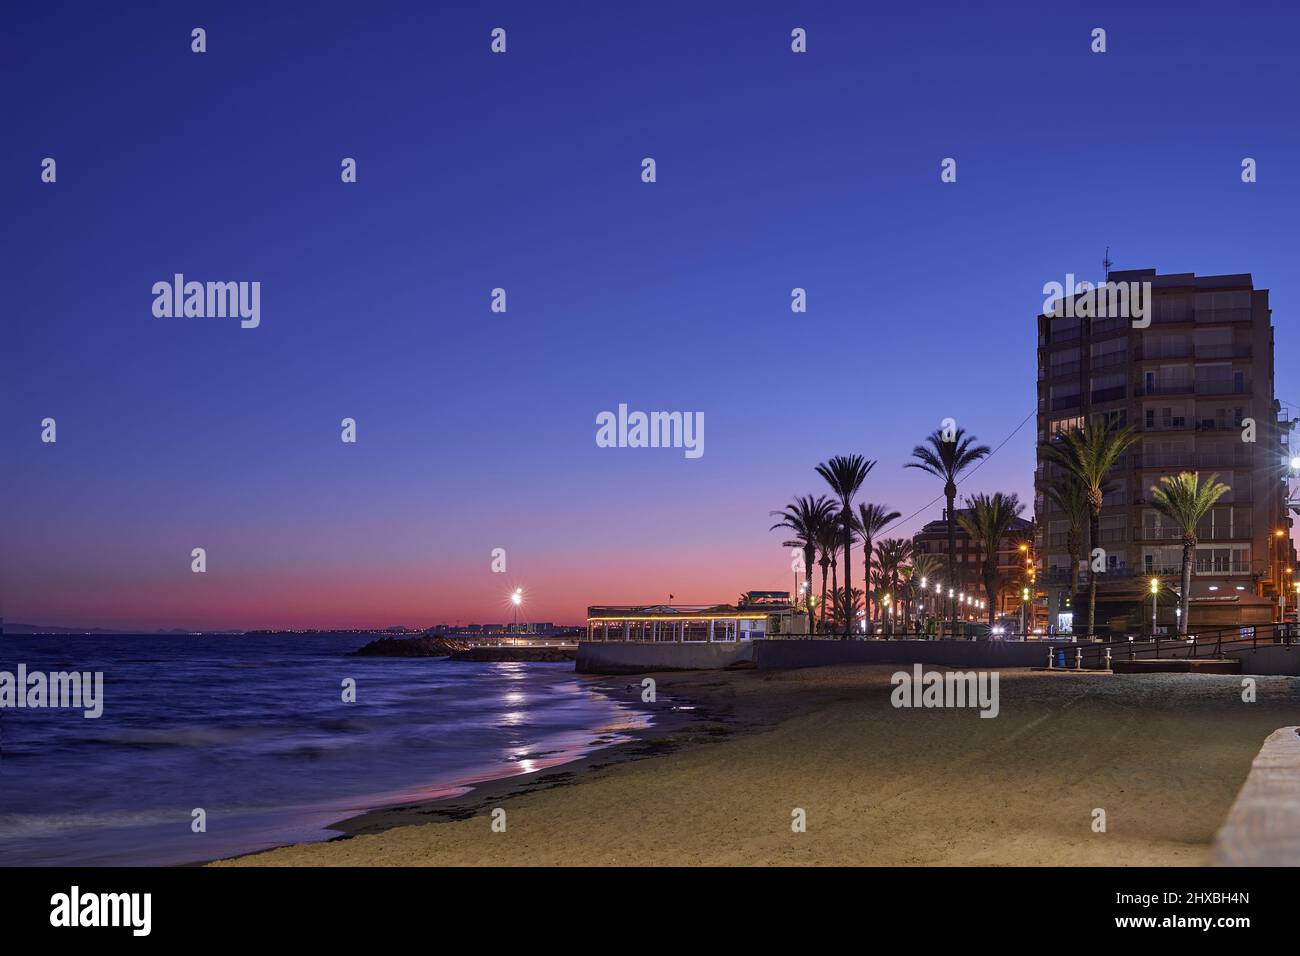 Seafront at popular Playa del Cura beach in Torrevieja. Alicante. Spain. Ttourist resort city at dawn, sunset Stock Photo